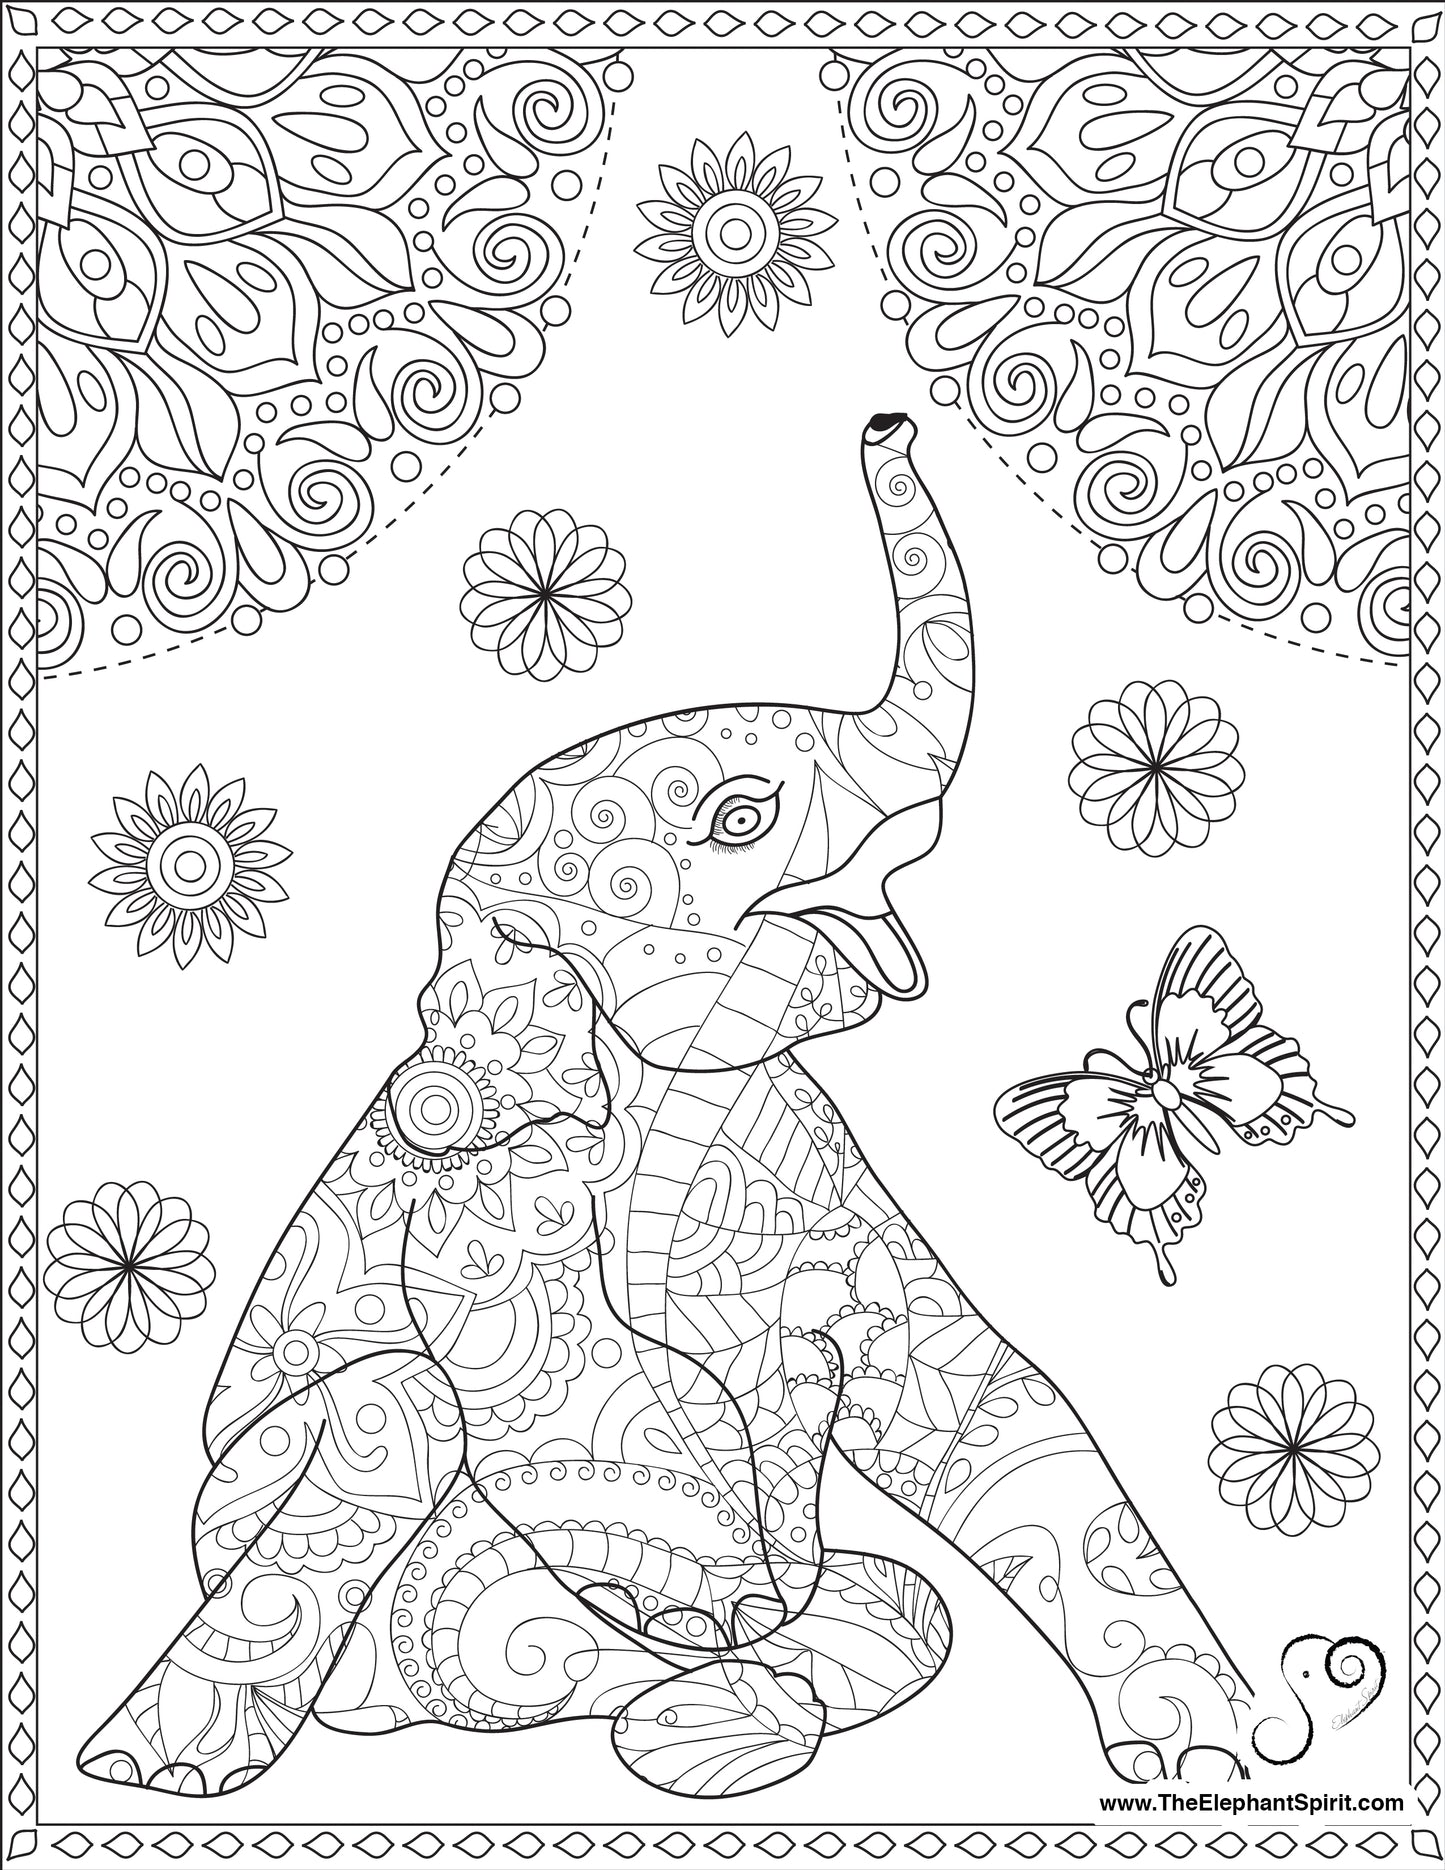 FREE Coloring Page 04-28